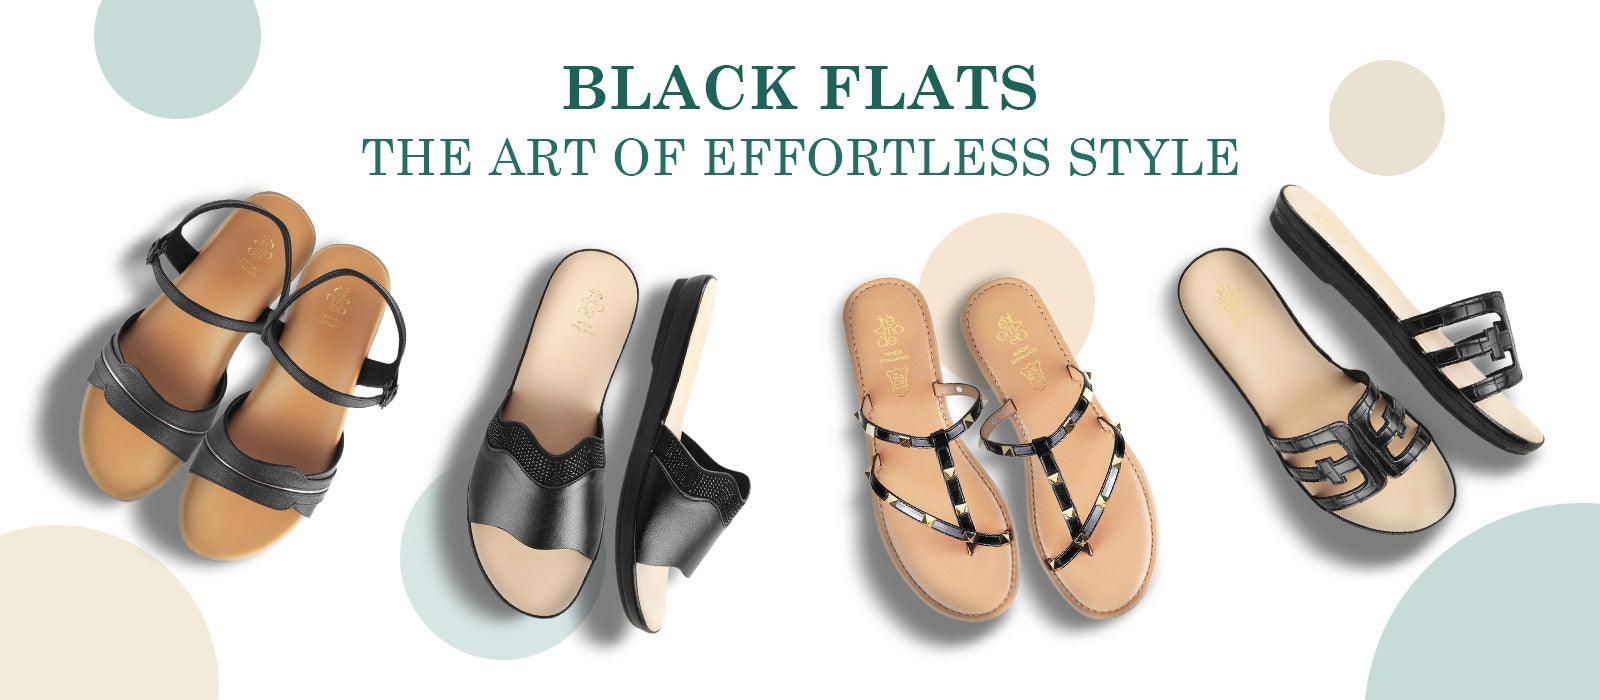 Black Flats: The Art of Effortless Style - Tresmode